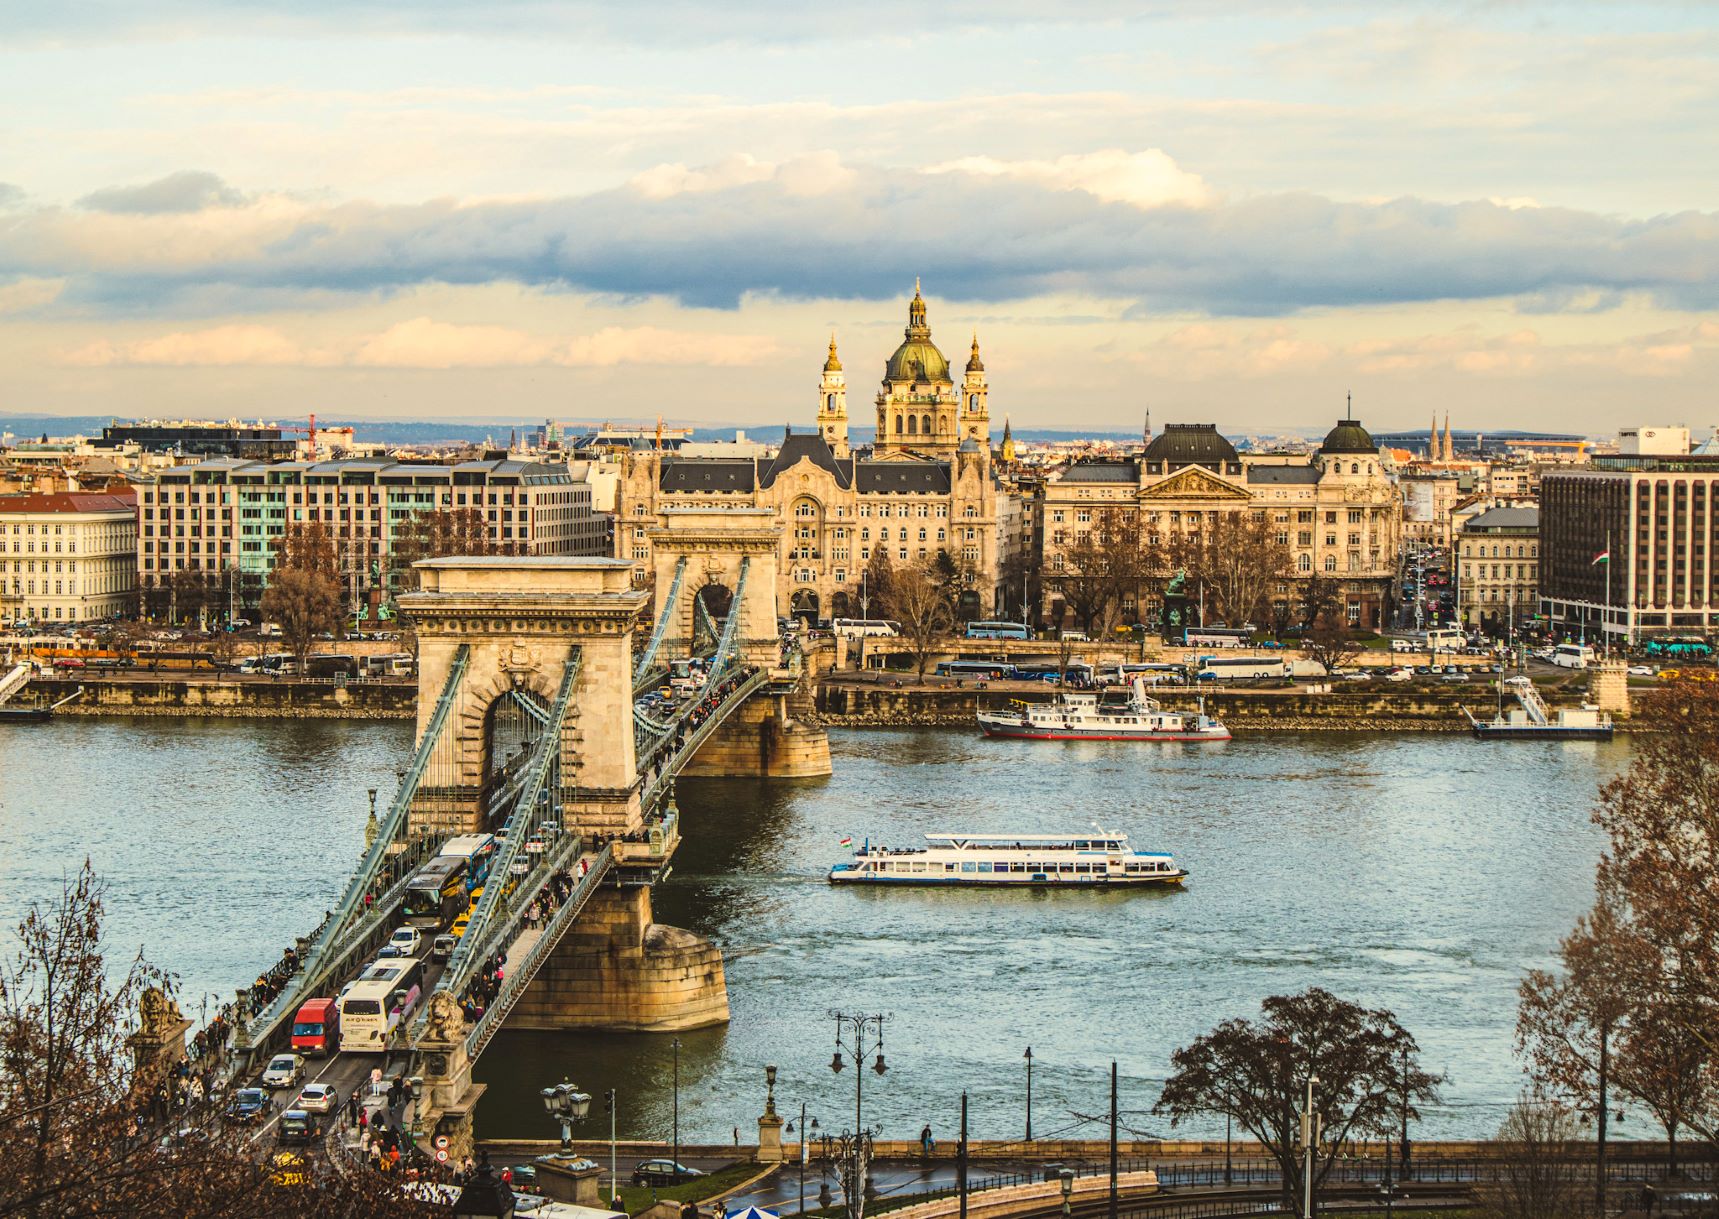 Budapest is a stunning destination with gorgeous bridges and castles.